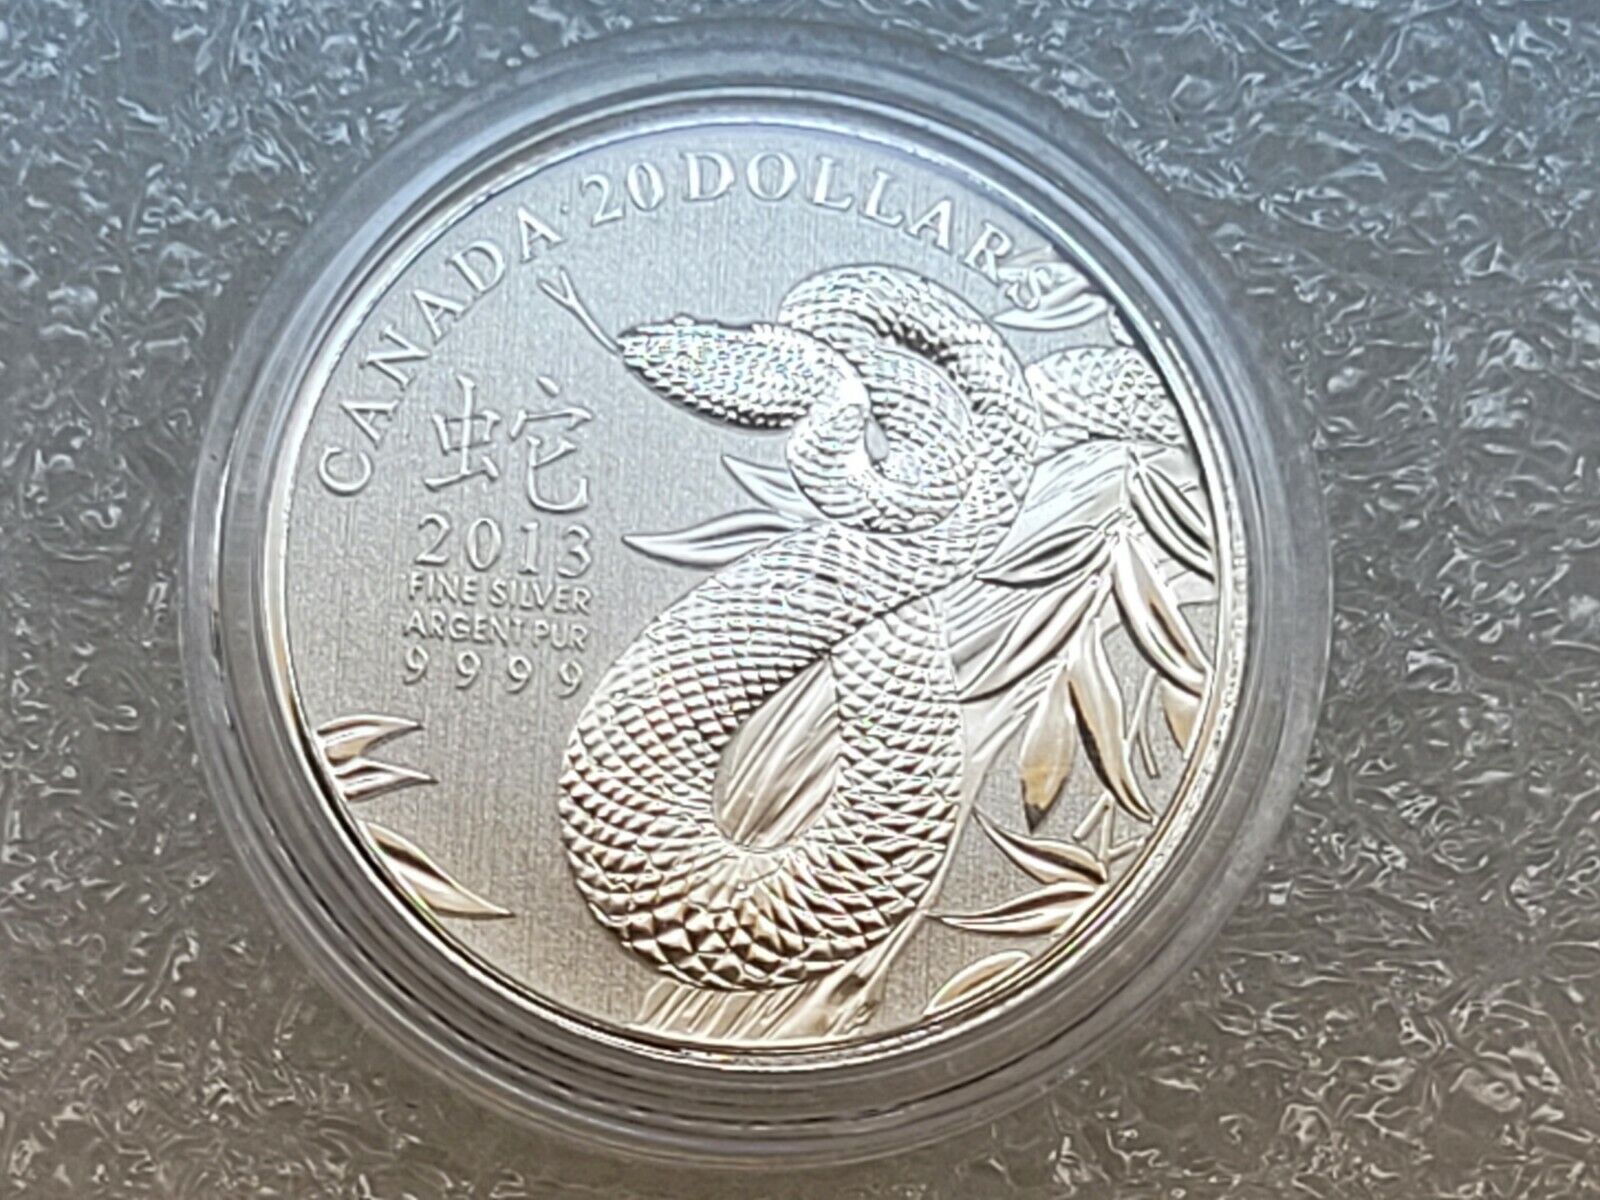 2013 Canada $20 Year of the Snake 1/4oz Fine Silver